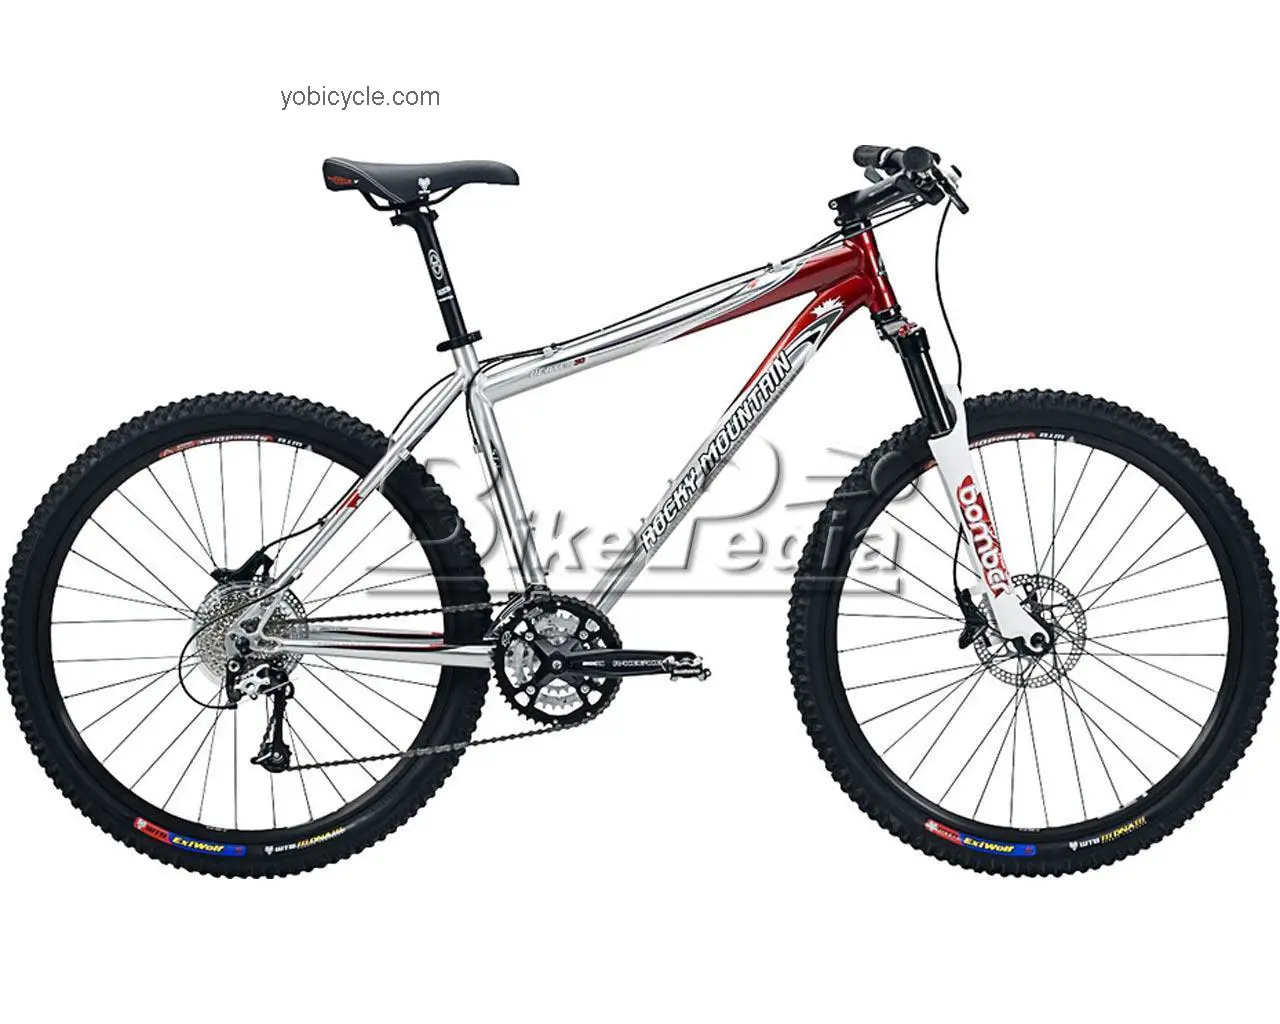 Rocky Mountain Vertex 30 2009 comparison online with competitors